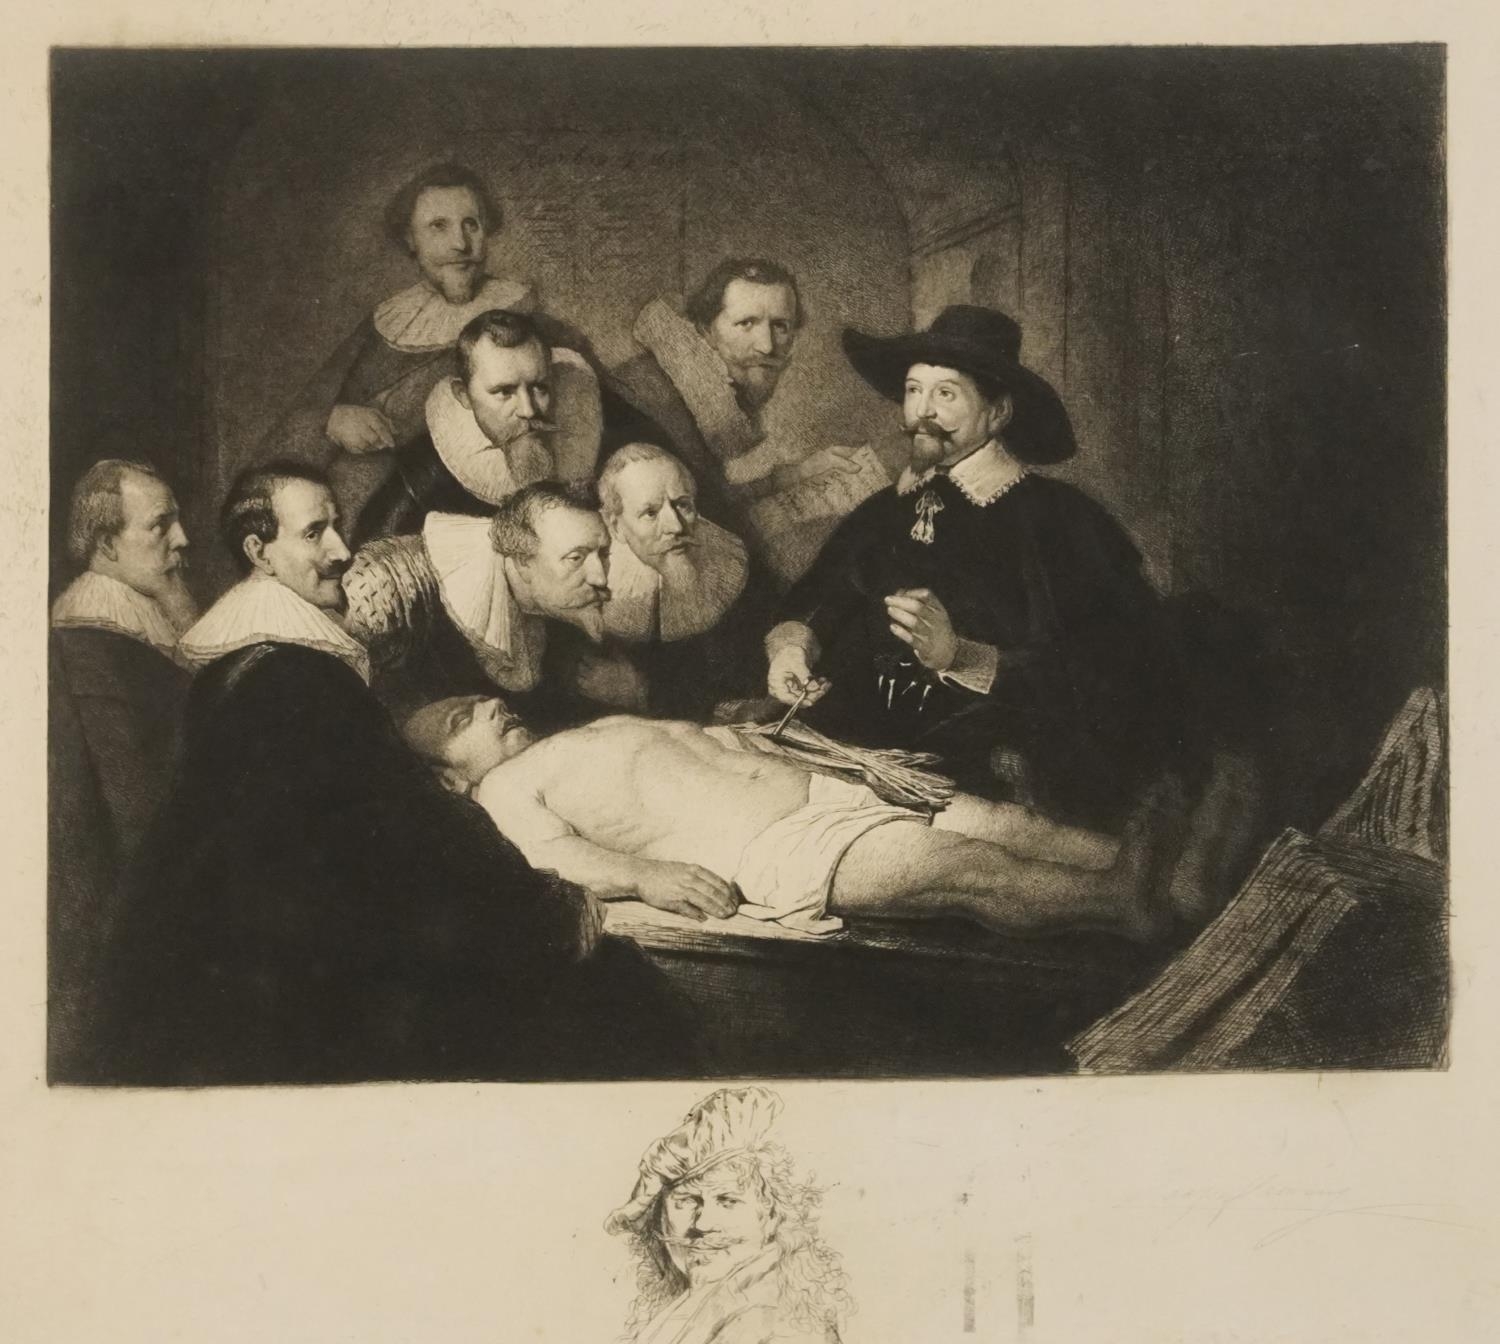 After Rembrandt van Rijn - The Anatomy Lesson, print in colour with ink self portrait sketch of